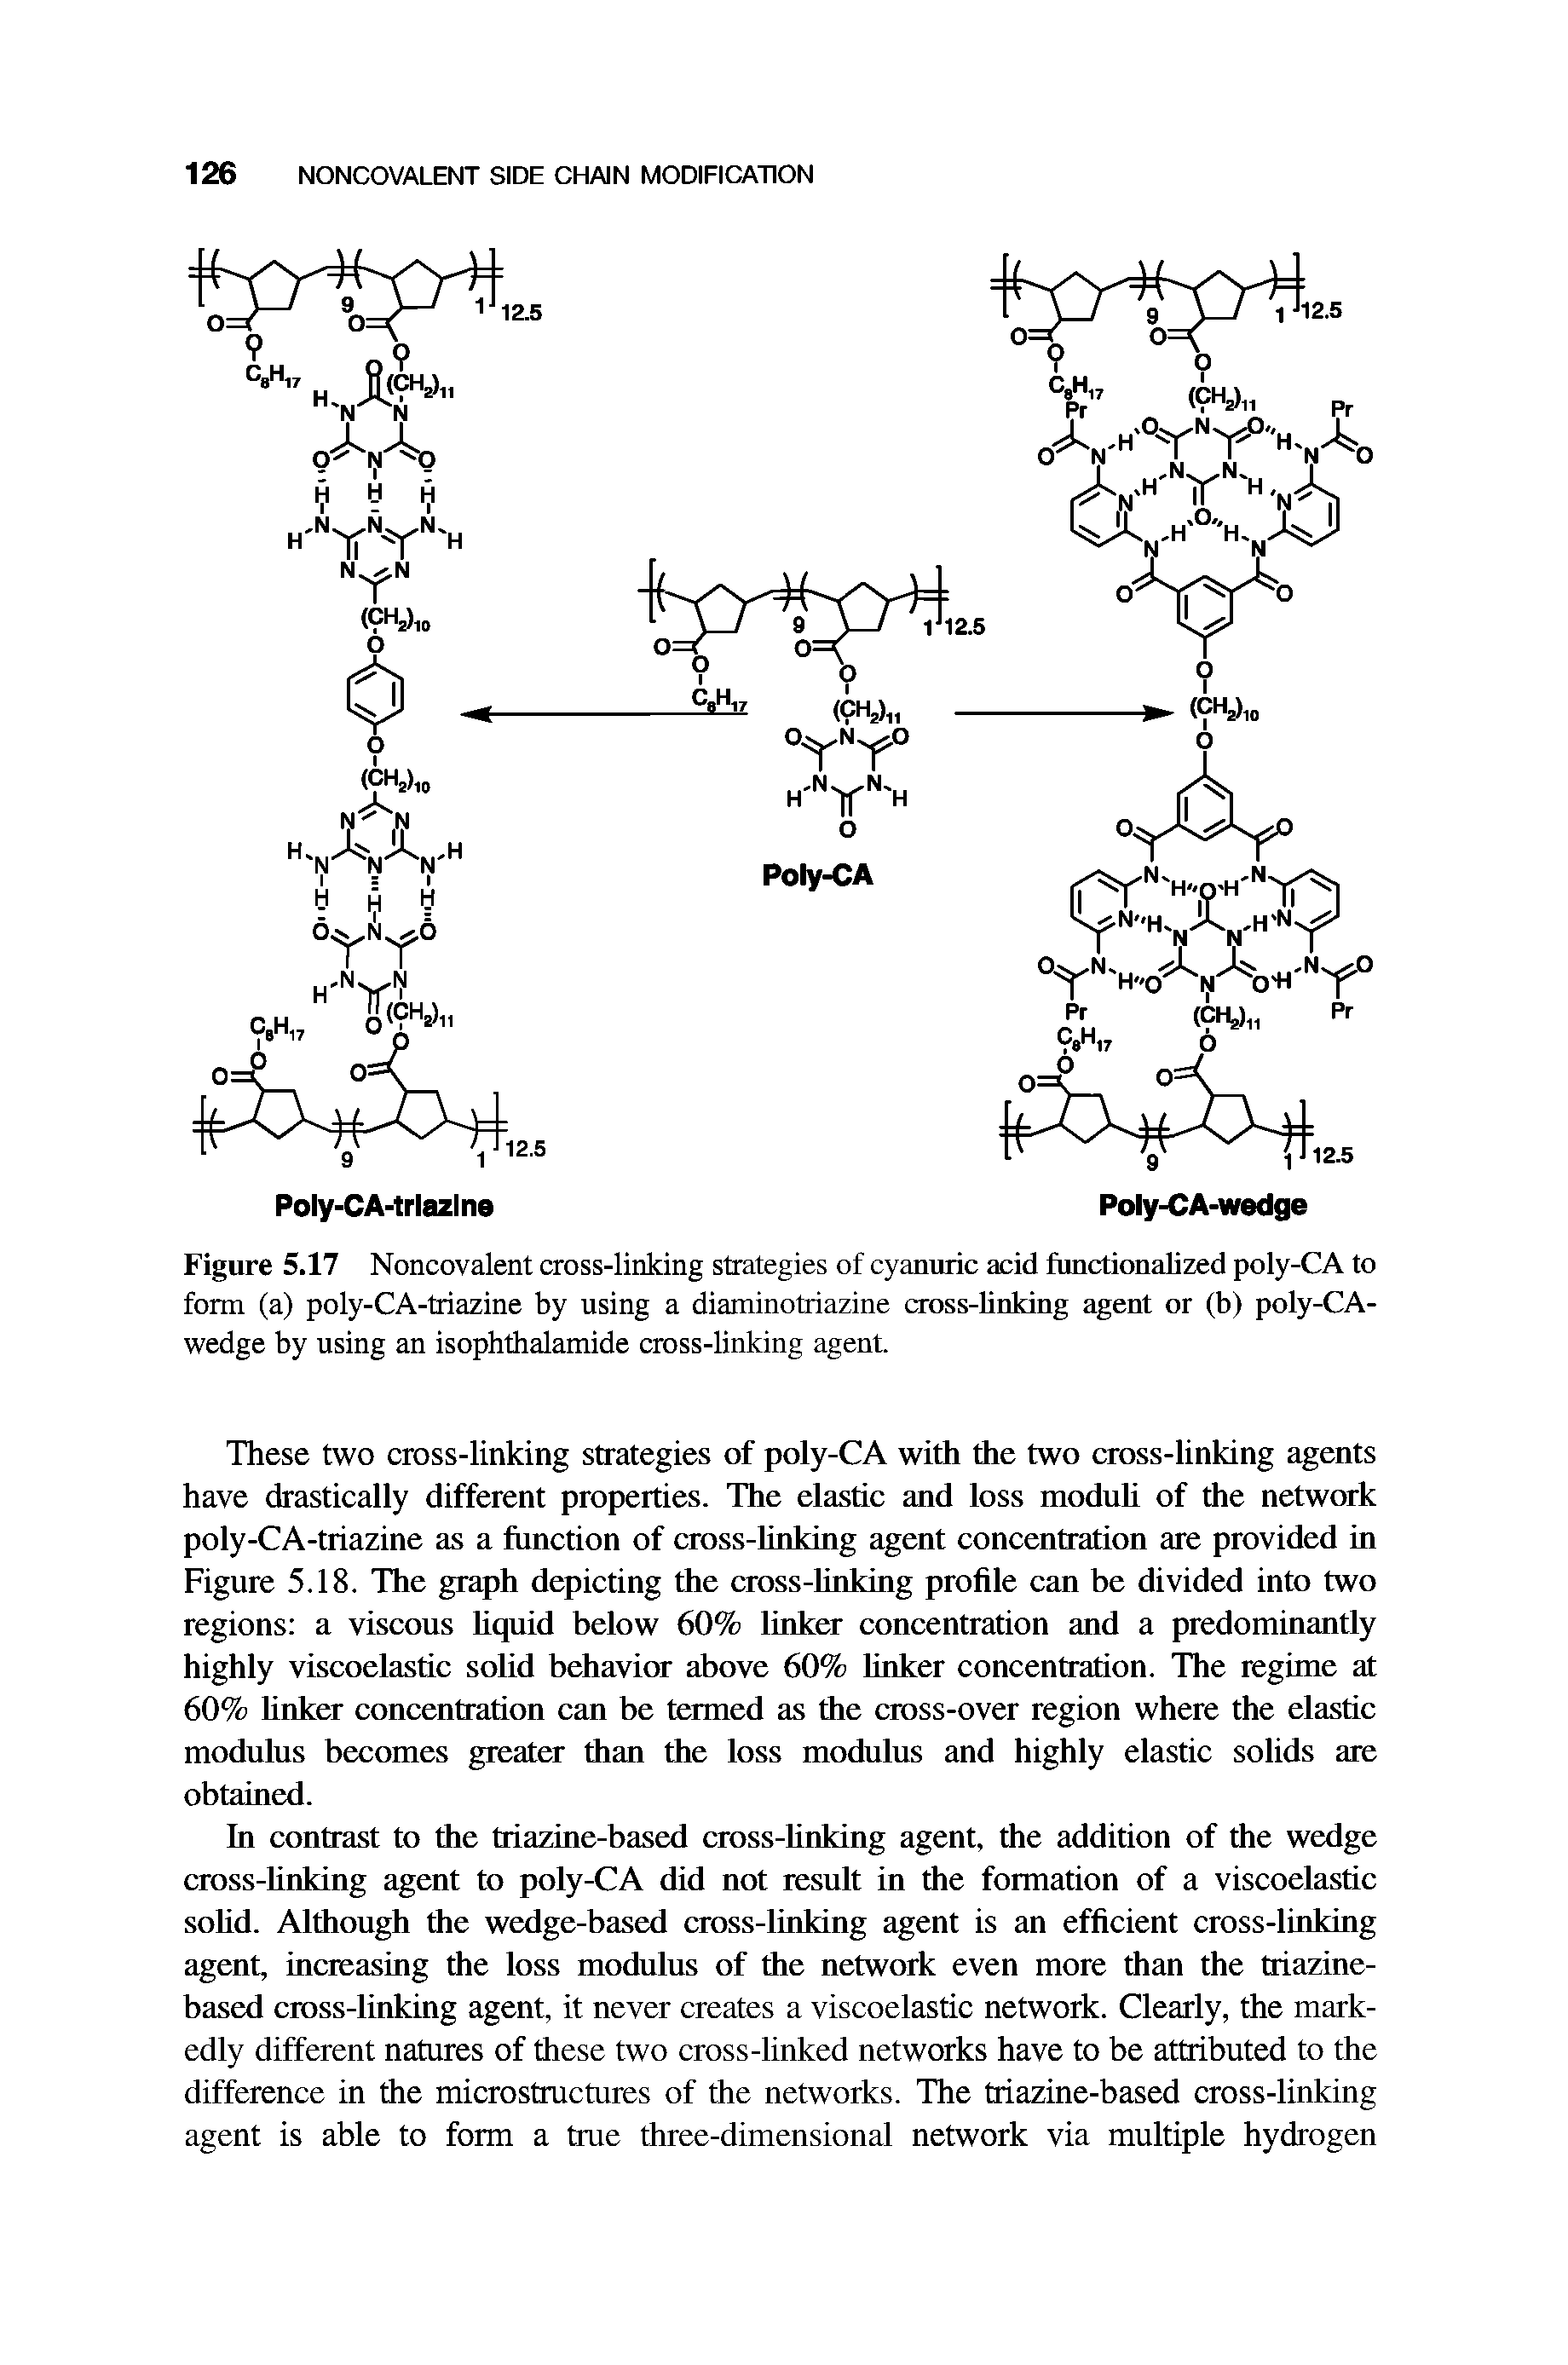 Figure 5.17 Noncovalent cross-linking strategies of cyanuric acid functionalized poly-CA to form (a) poly-CA-triazine by using a diaminotriazine cross-linking agent or (b) poly-CA-wedge by using an isophthalamide cross-linking agent.